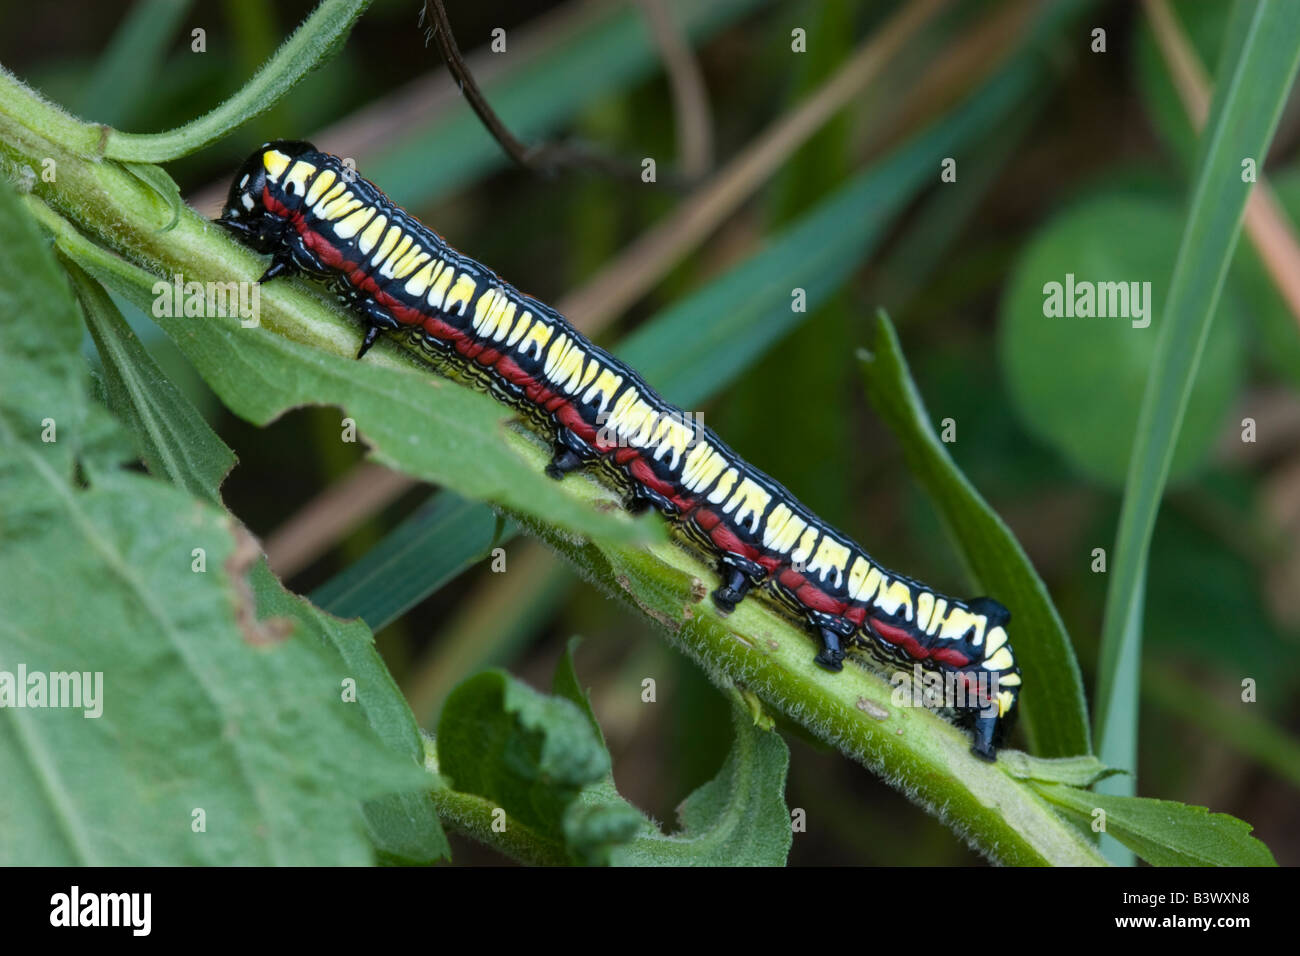 colourful caterpillar worm grub butterfly insect Stock Photo